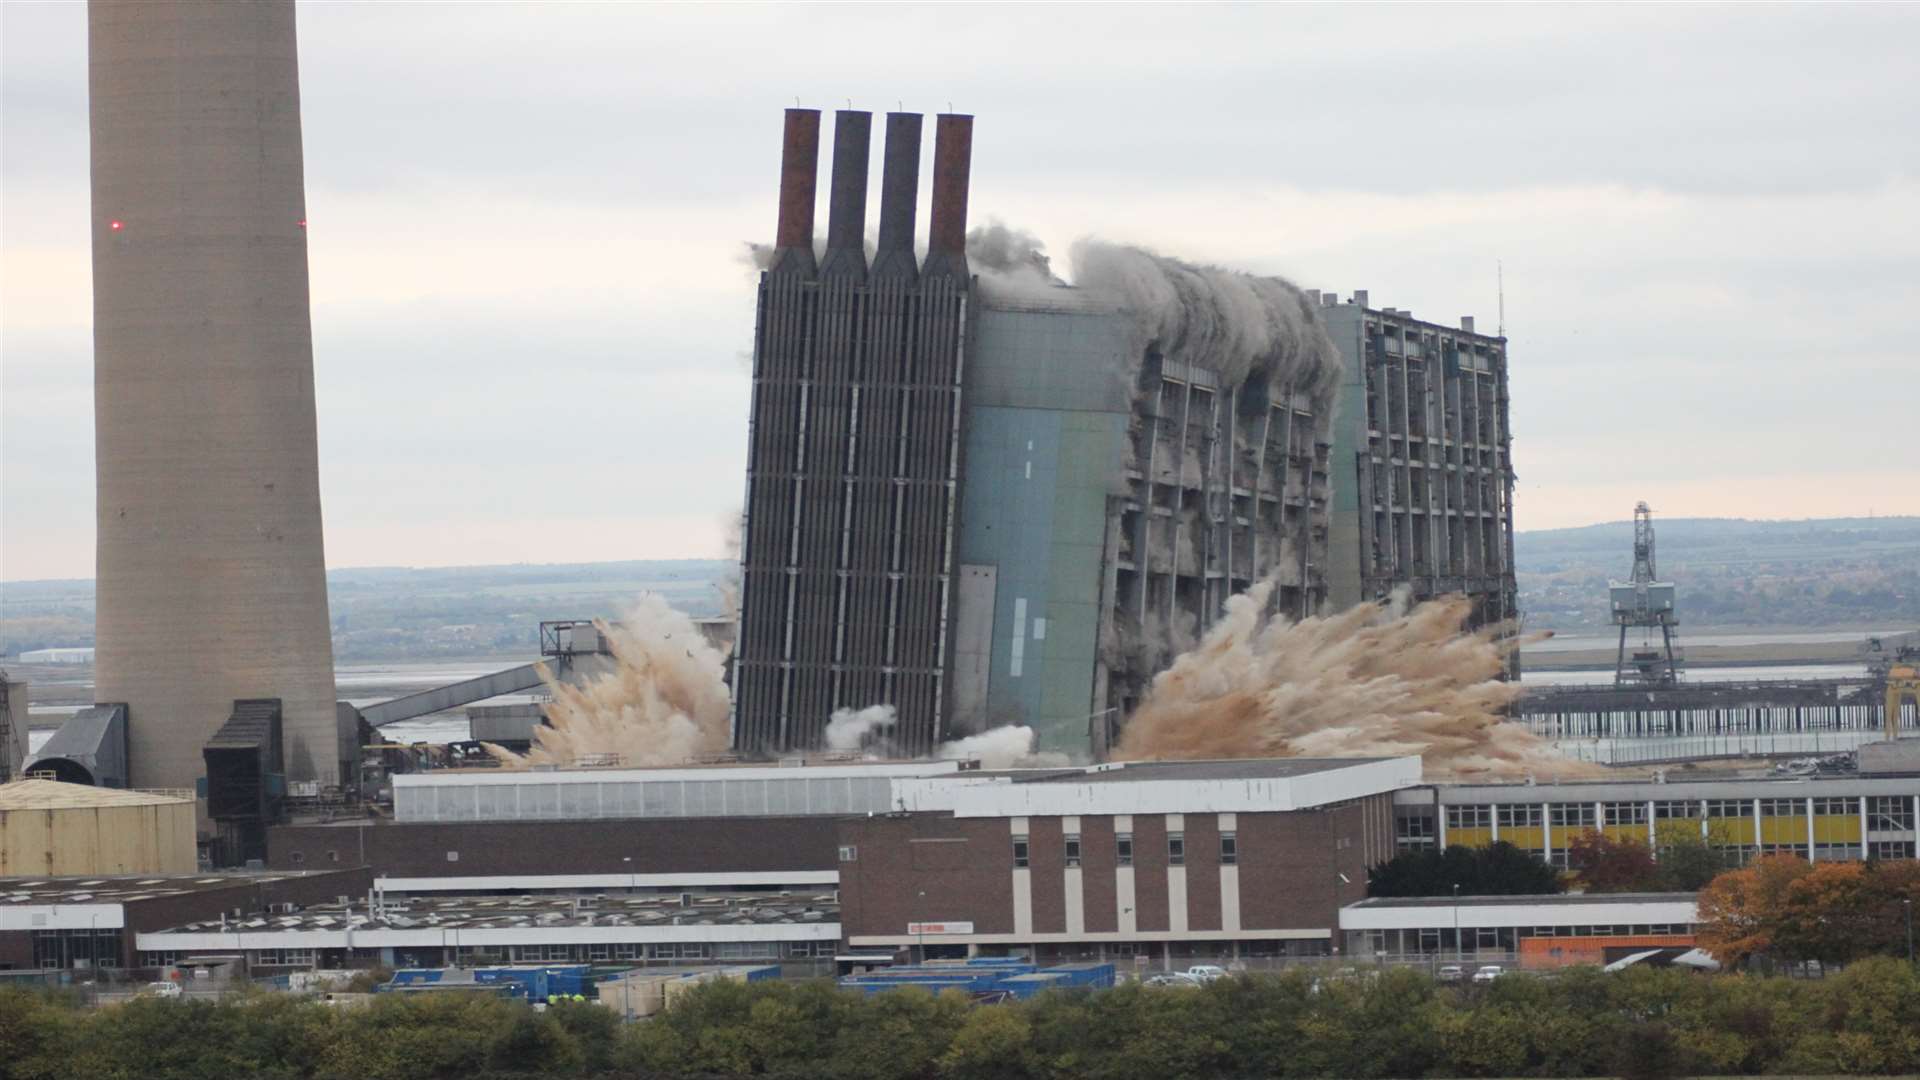 The boiler houses have already been blown up. Picture, David Allsop.